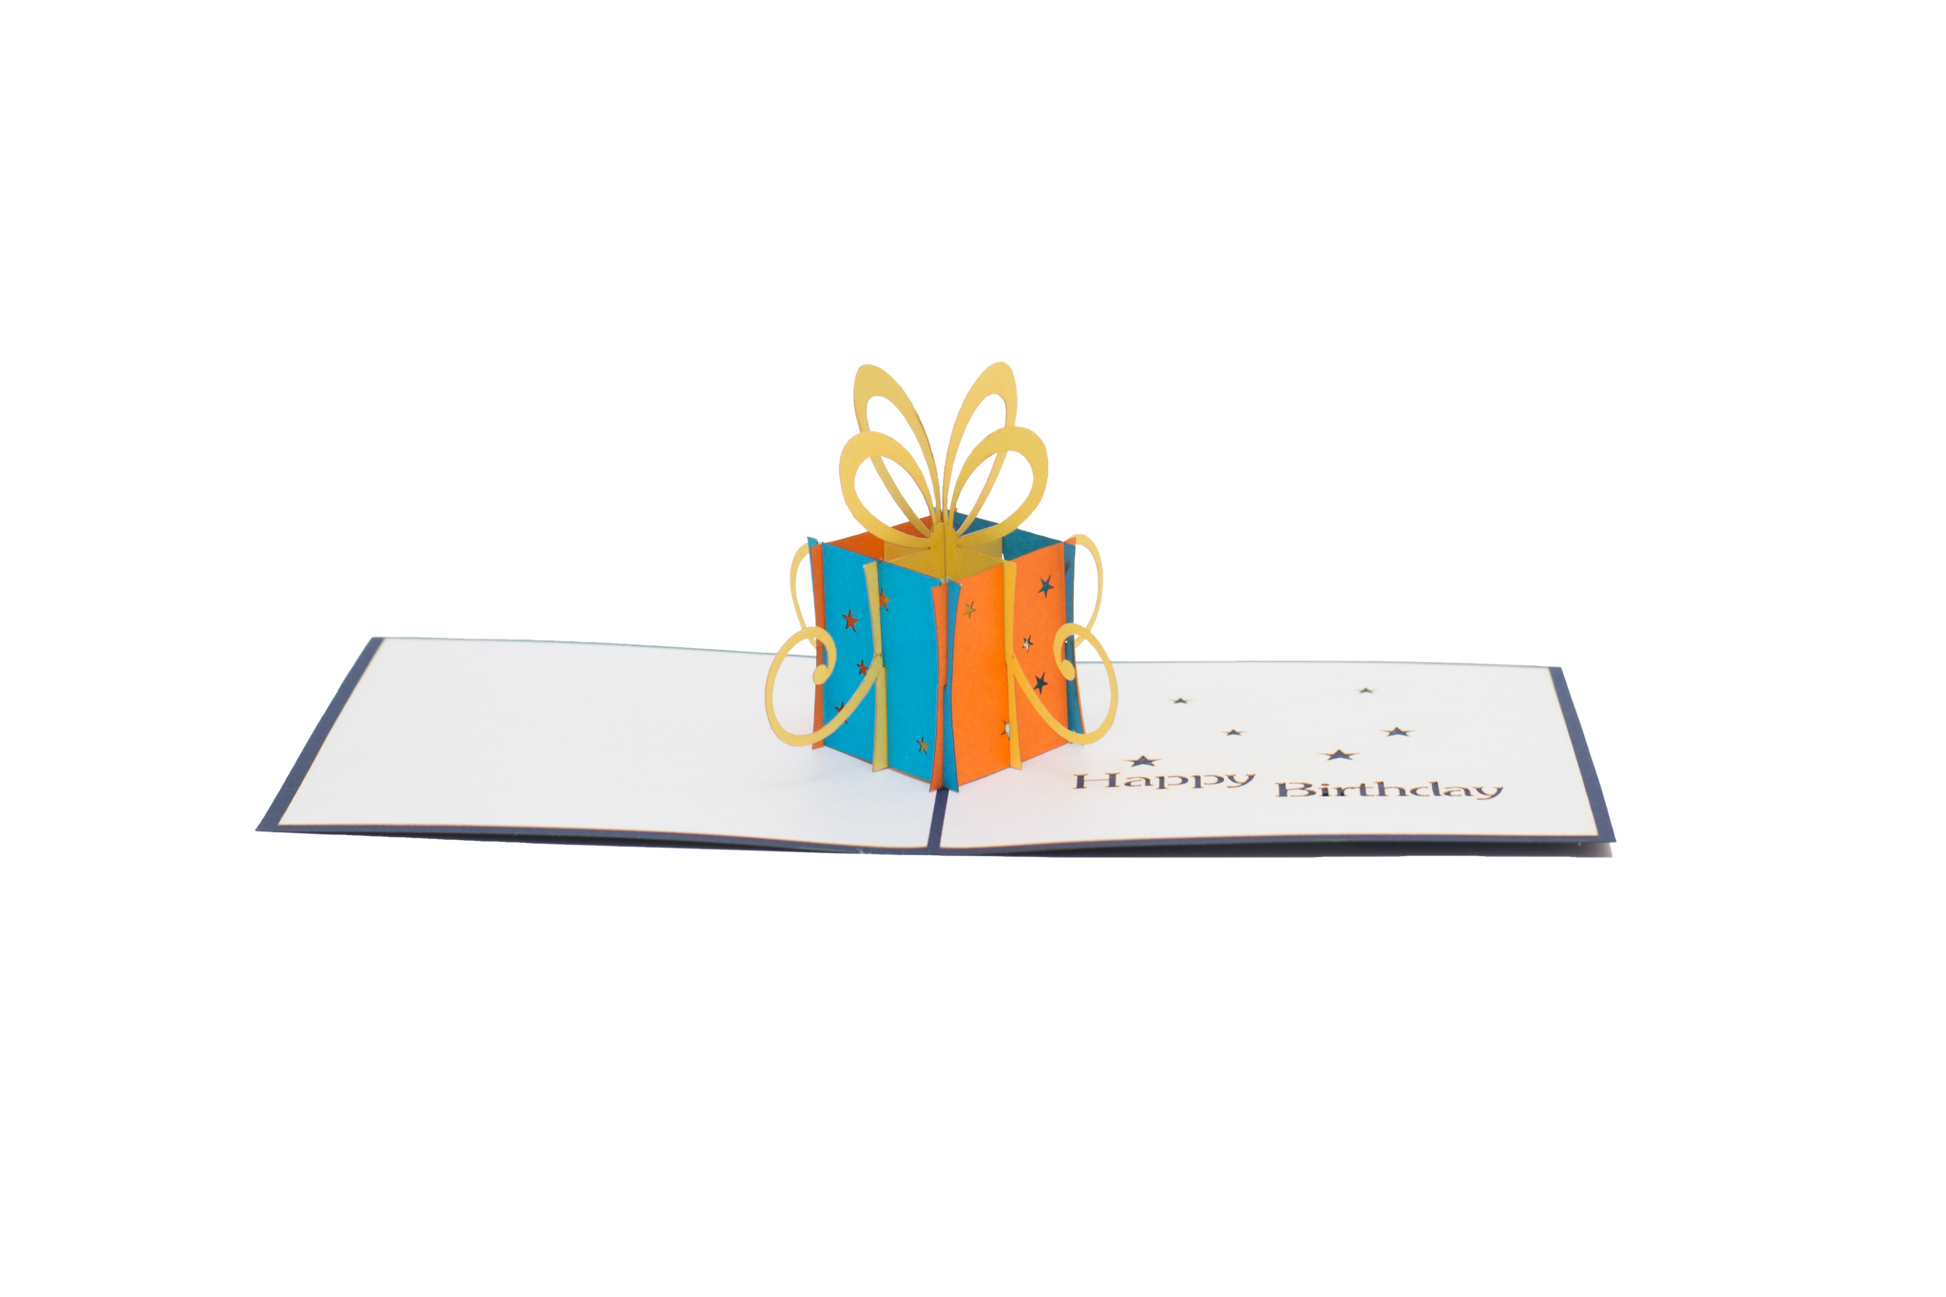 Pop-up card showing orange and blue wrapping on sides with yellow bow on top, and "happy birthday" written on card